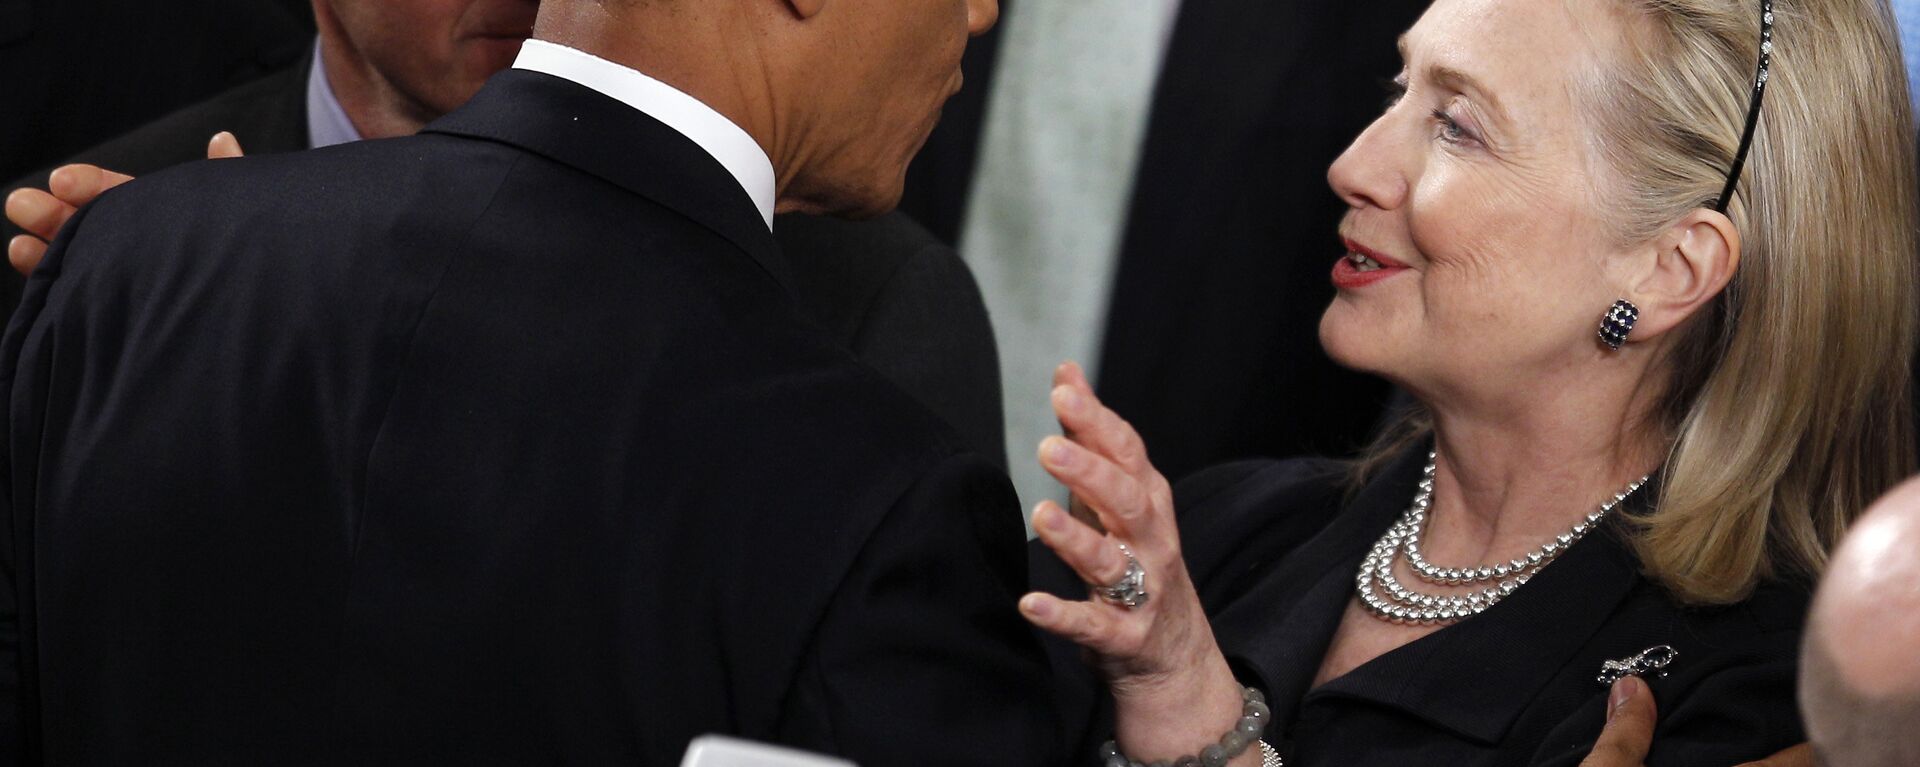 Former Secretary of State Hillary Rodham Clinton greets President Barack Obama after he delivered his State of the Union address on Capitol Hill in Washington. - Sputnik International, 1920, 28.07.2020